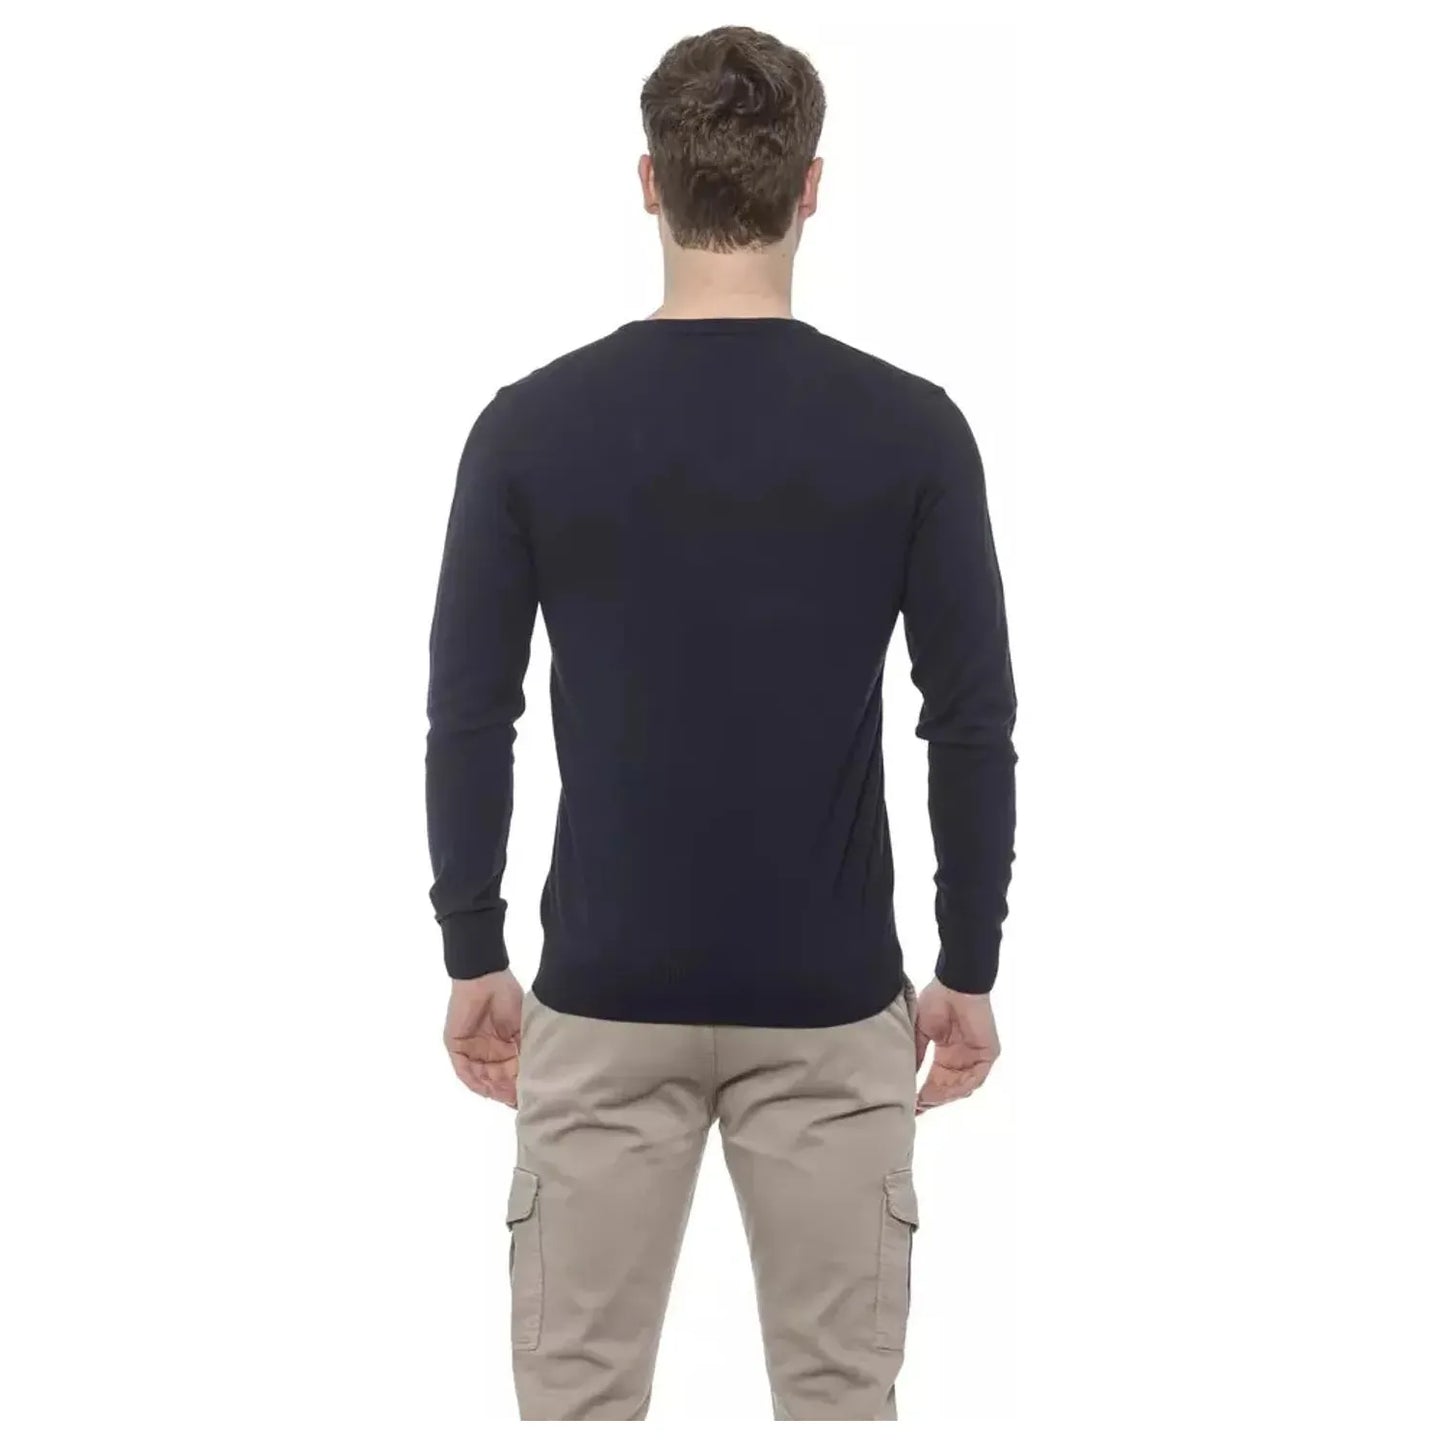 Conte of Florence Elegant V-Neck Cotton Sweater for Men prussianblue-sweater-1 stock_product_image_20335_2111635469-16-8f3a98d0-bcd.webp